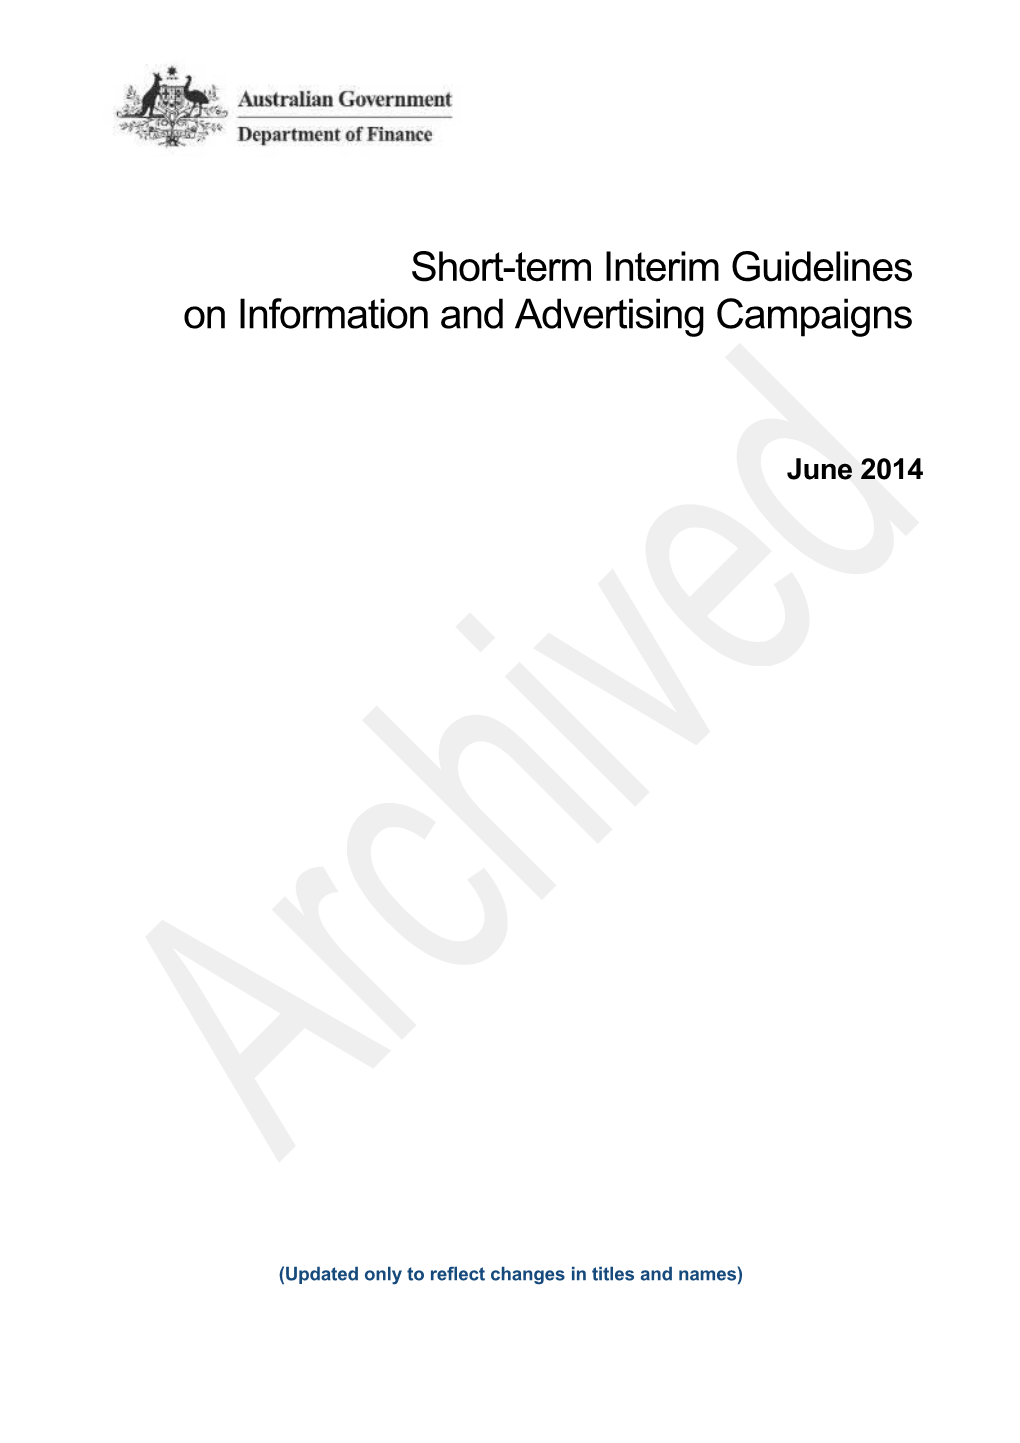 Short-Term Interim Guidelines on Information and Advertising Campaigns by Australian Government